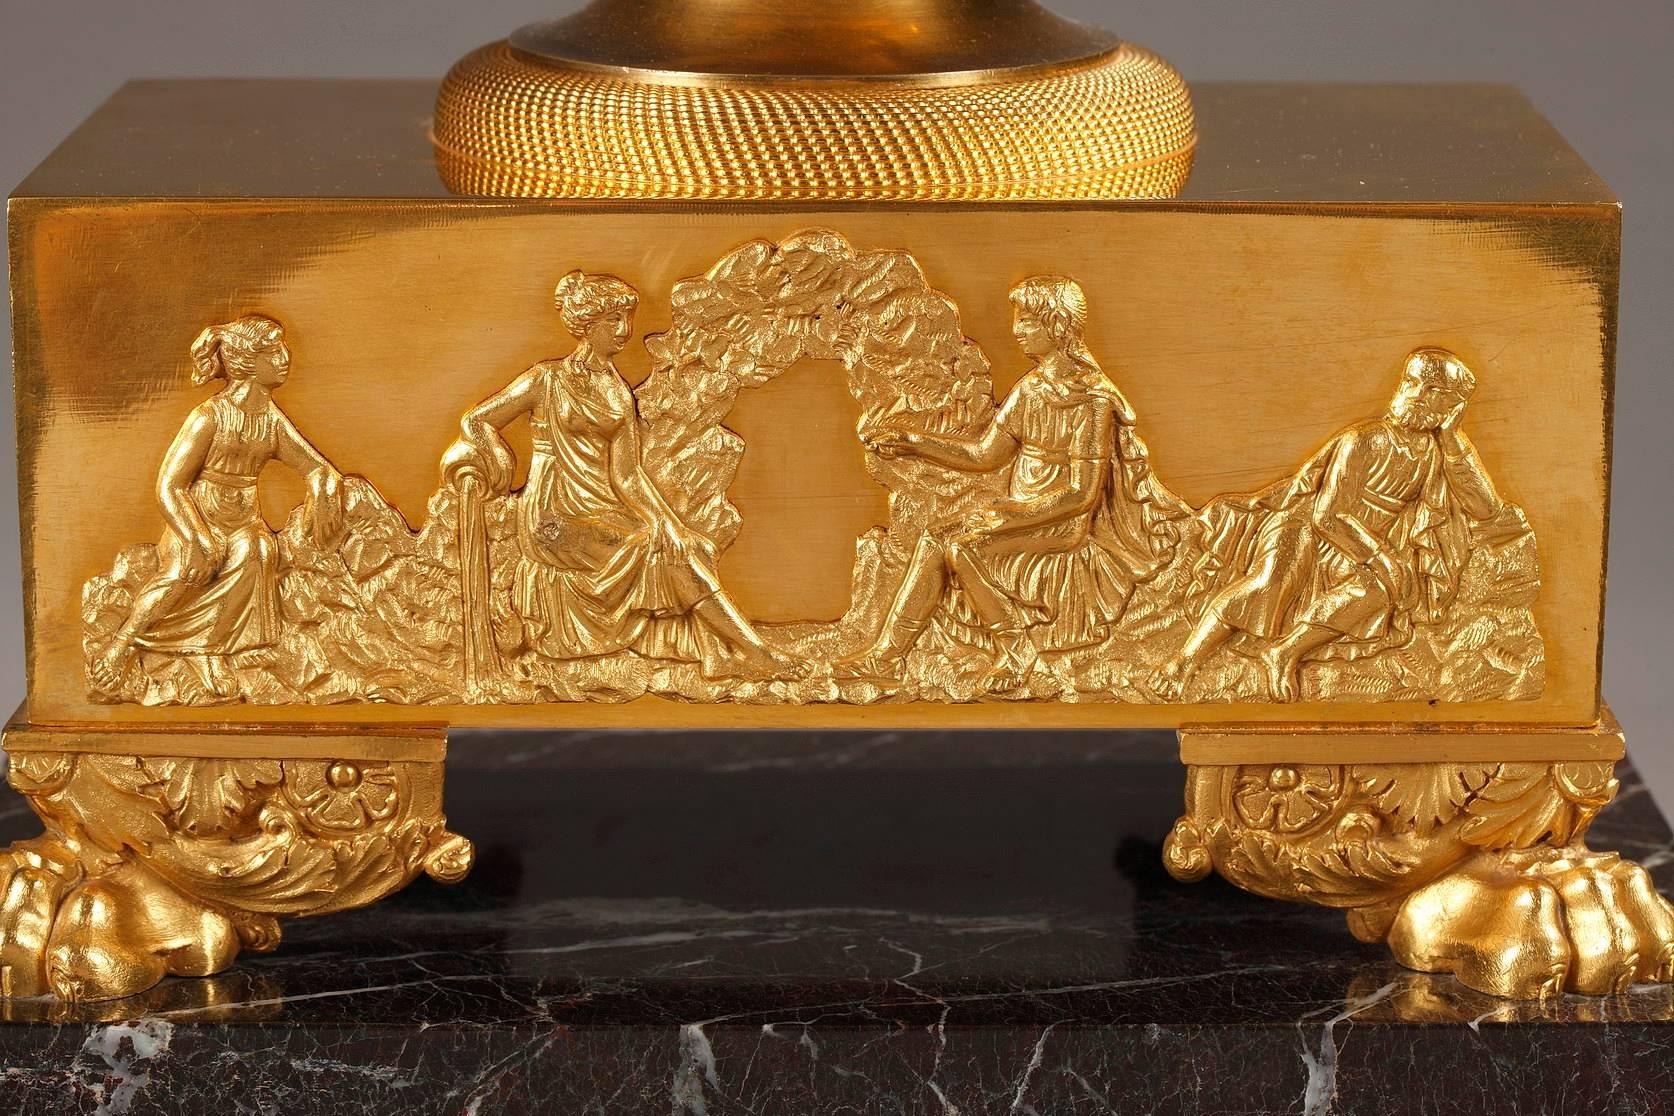 19th Century French Empire Centerpiece Perfume Burner in Gilt Bronze and Marble